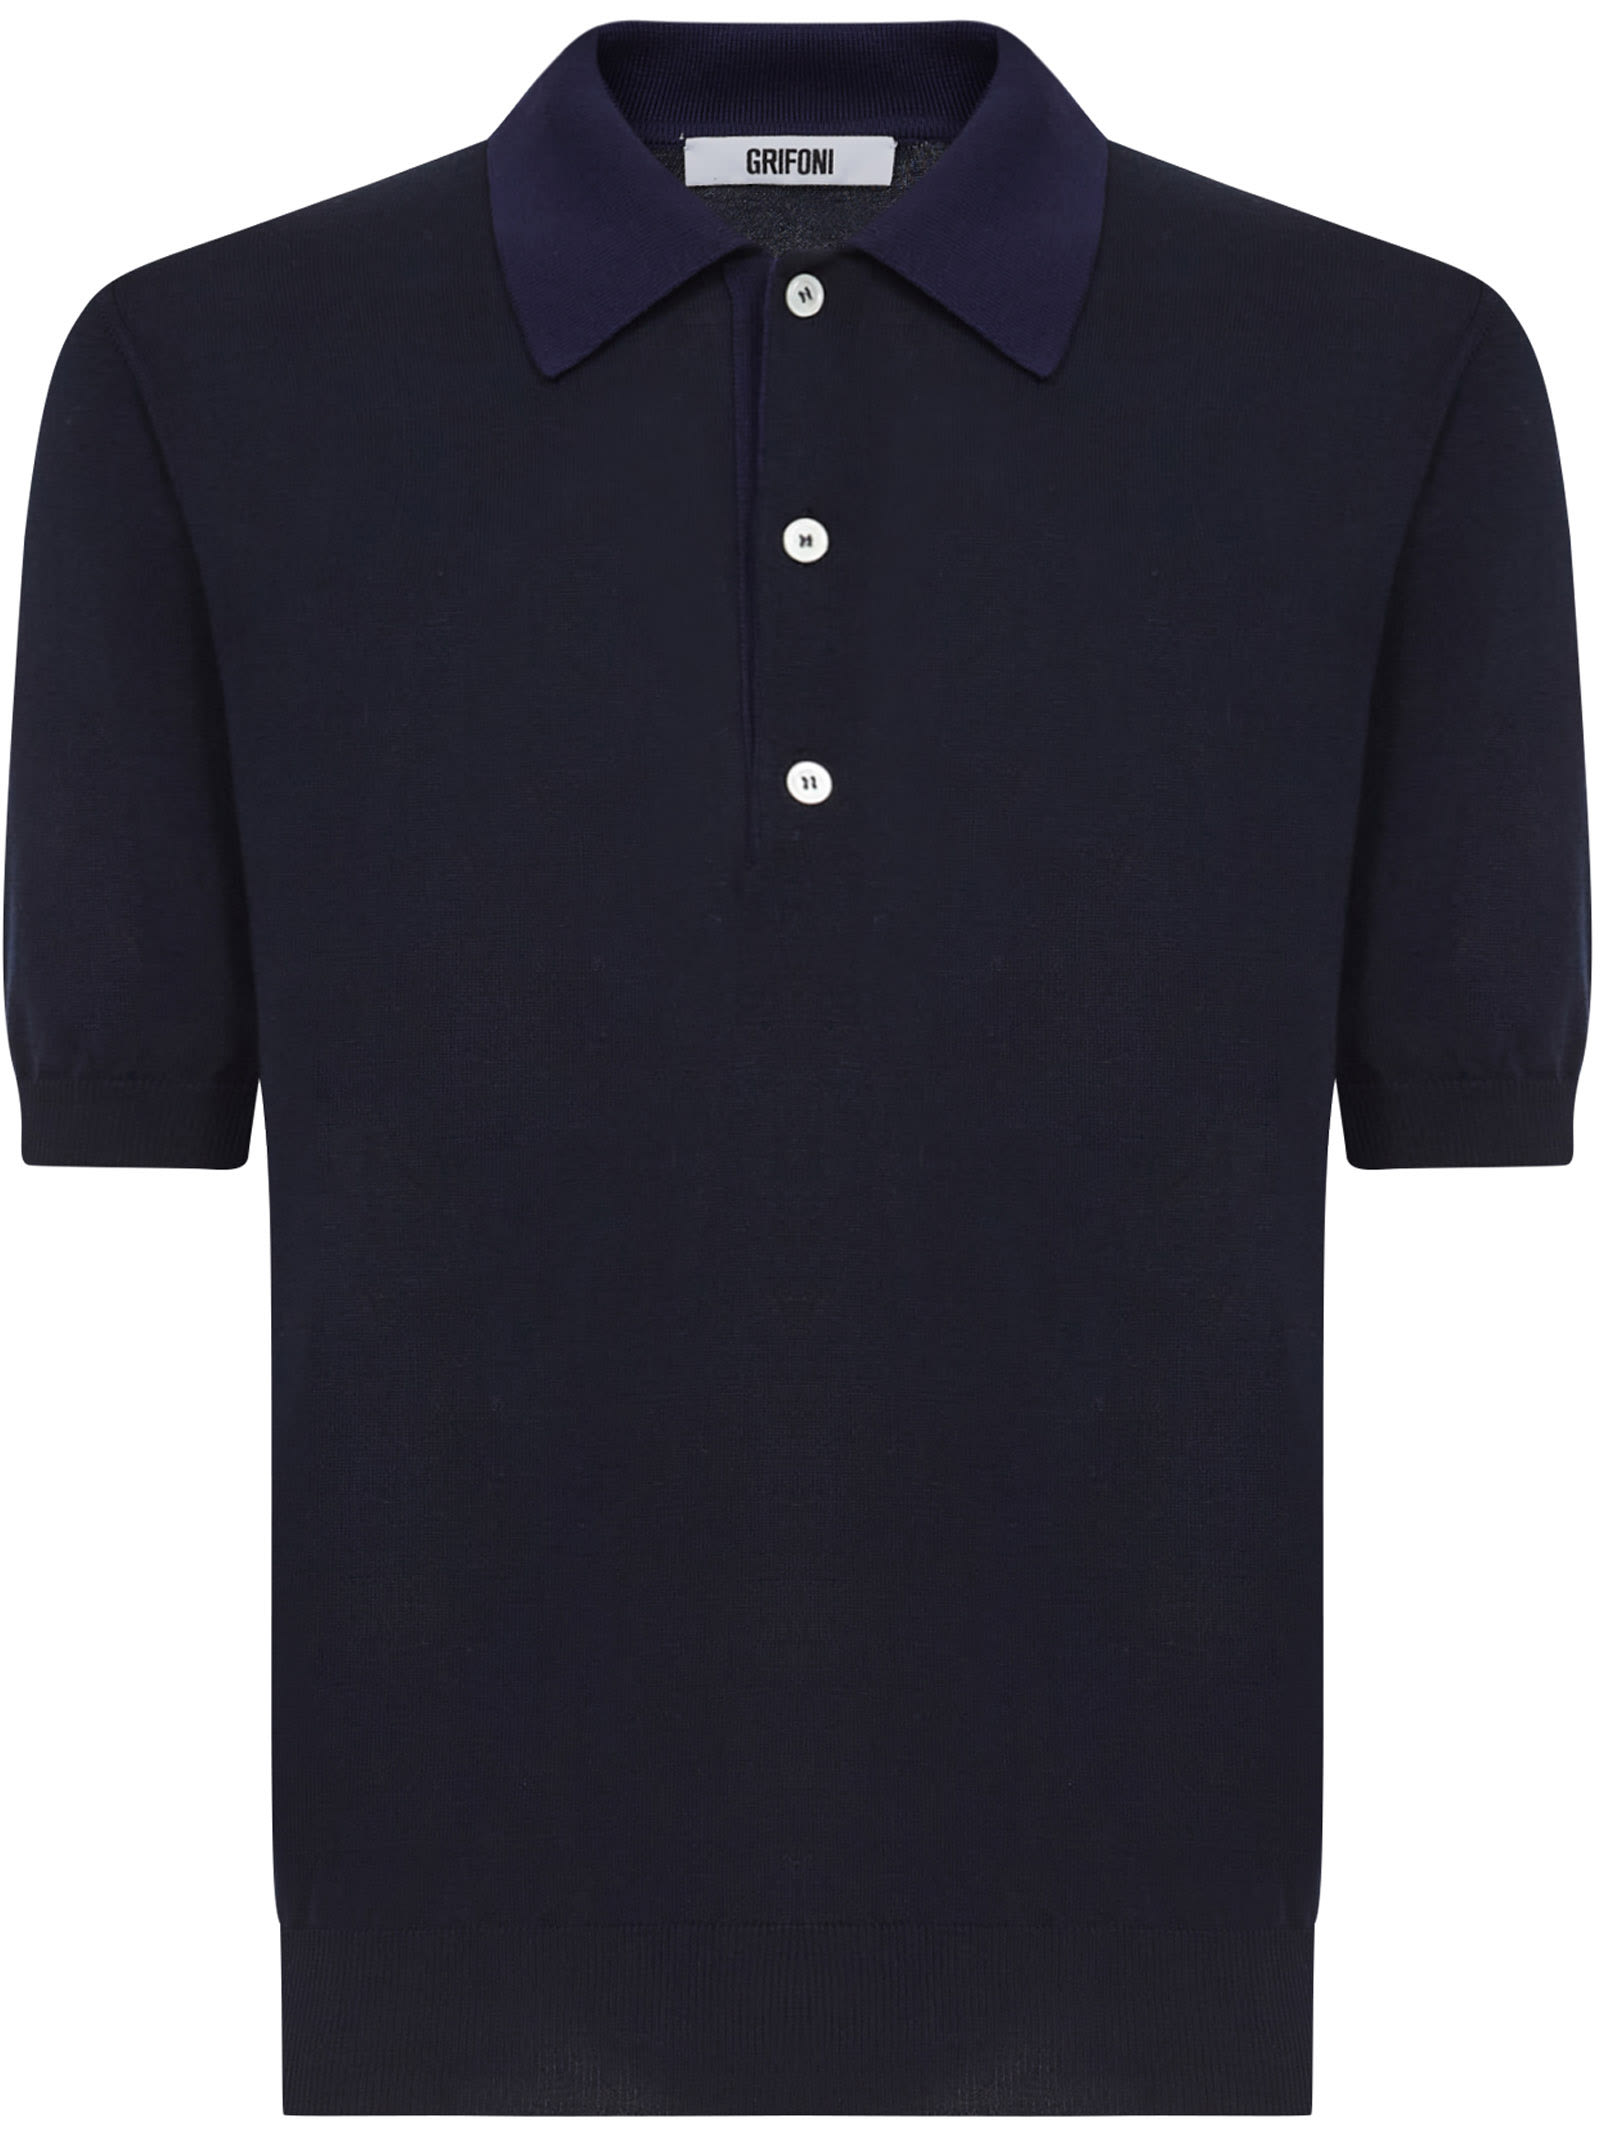 Mauro Grifoni Grifoni Polo Shirt In Blue